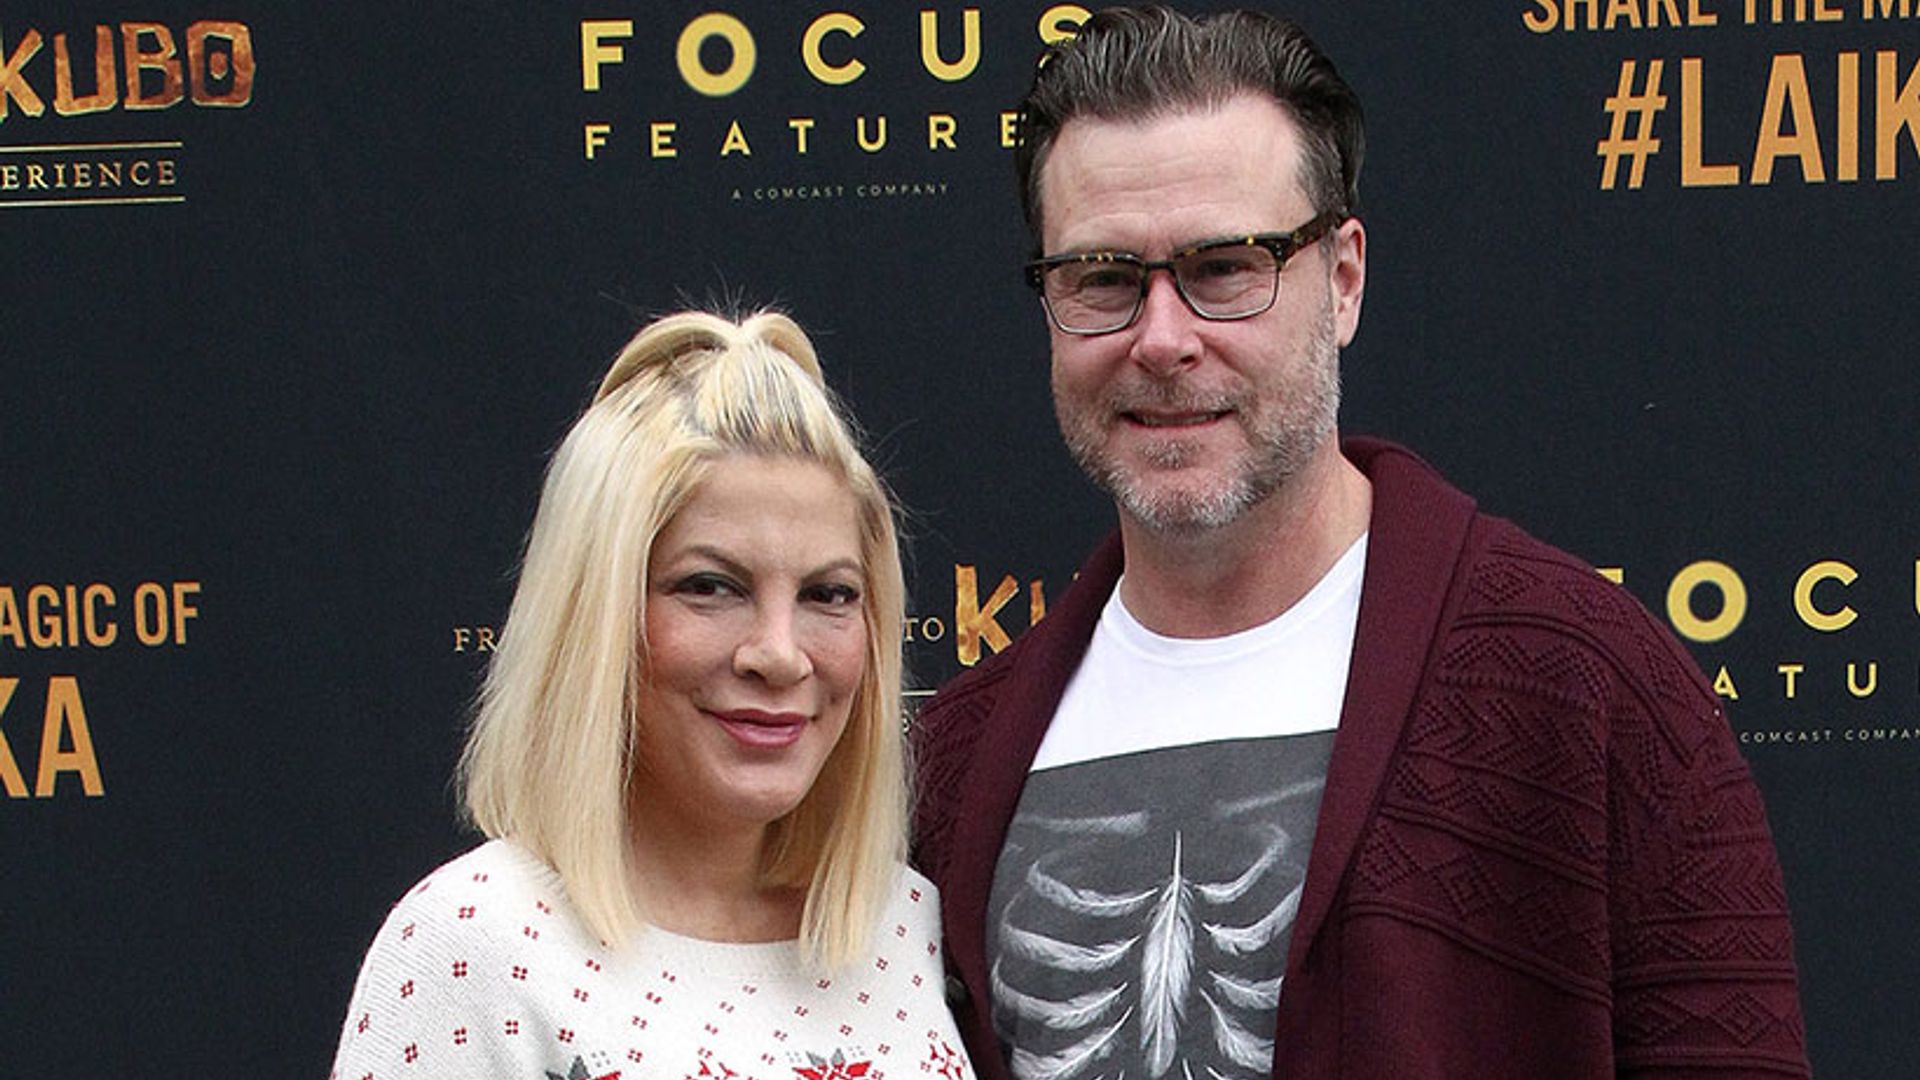 Tori Spelling welcomes fifth child with husband Dean McDermott - find out the cute name